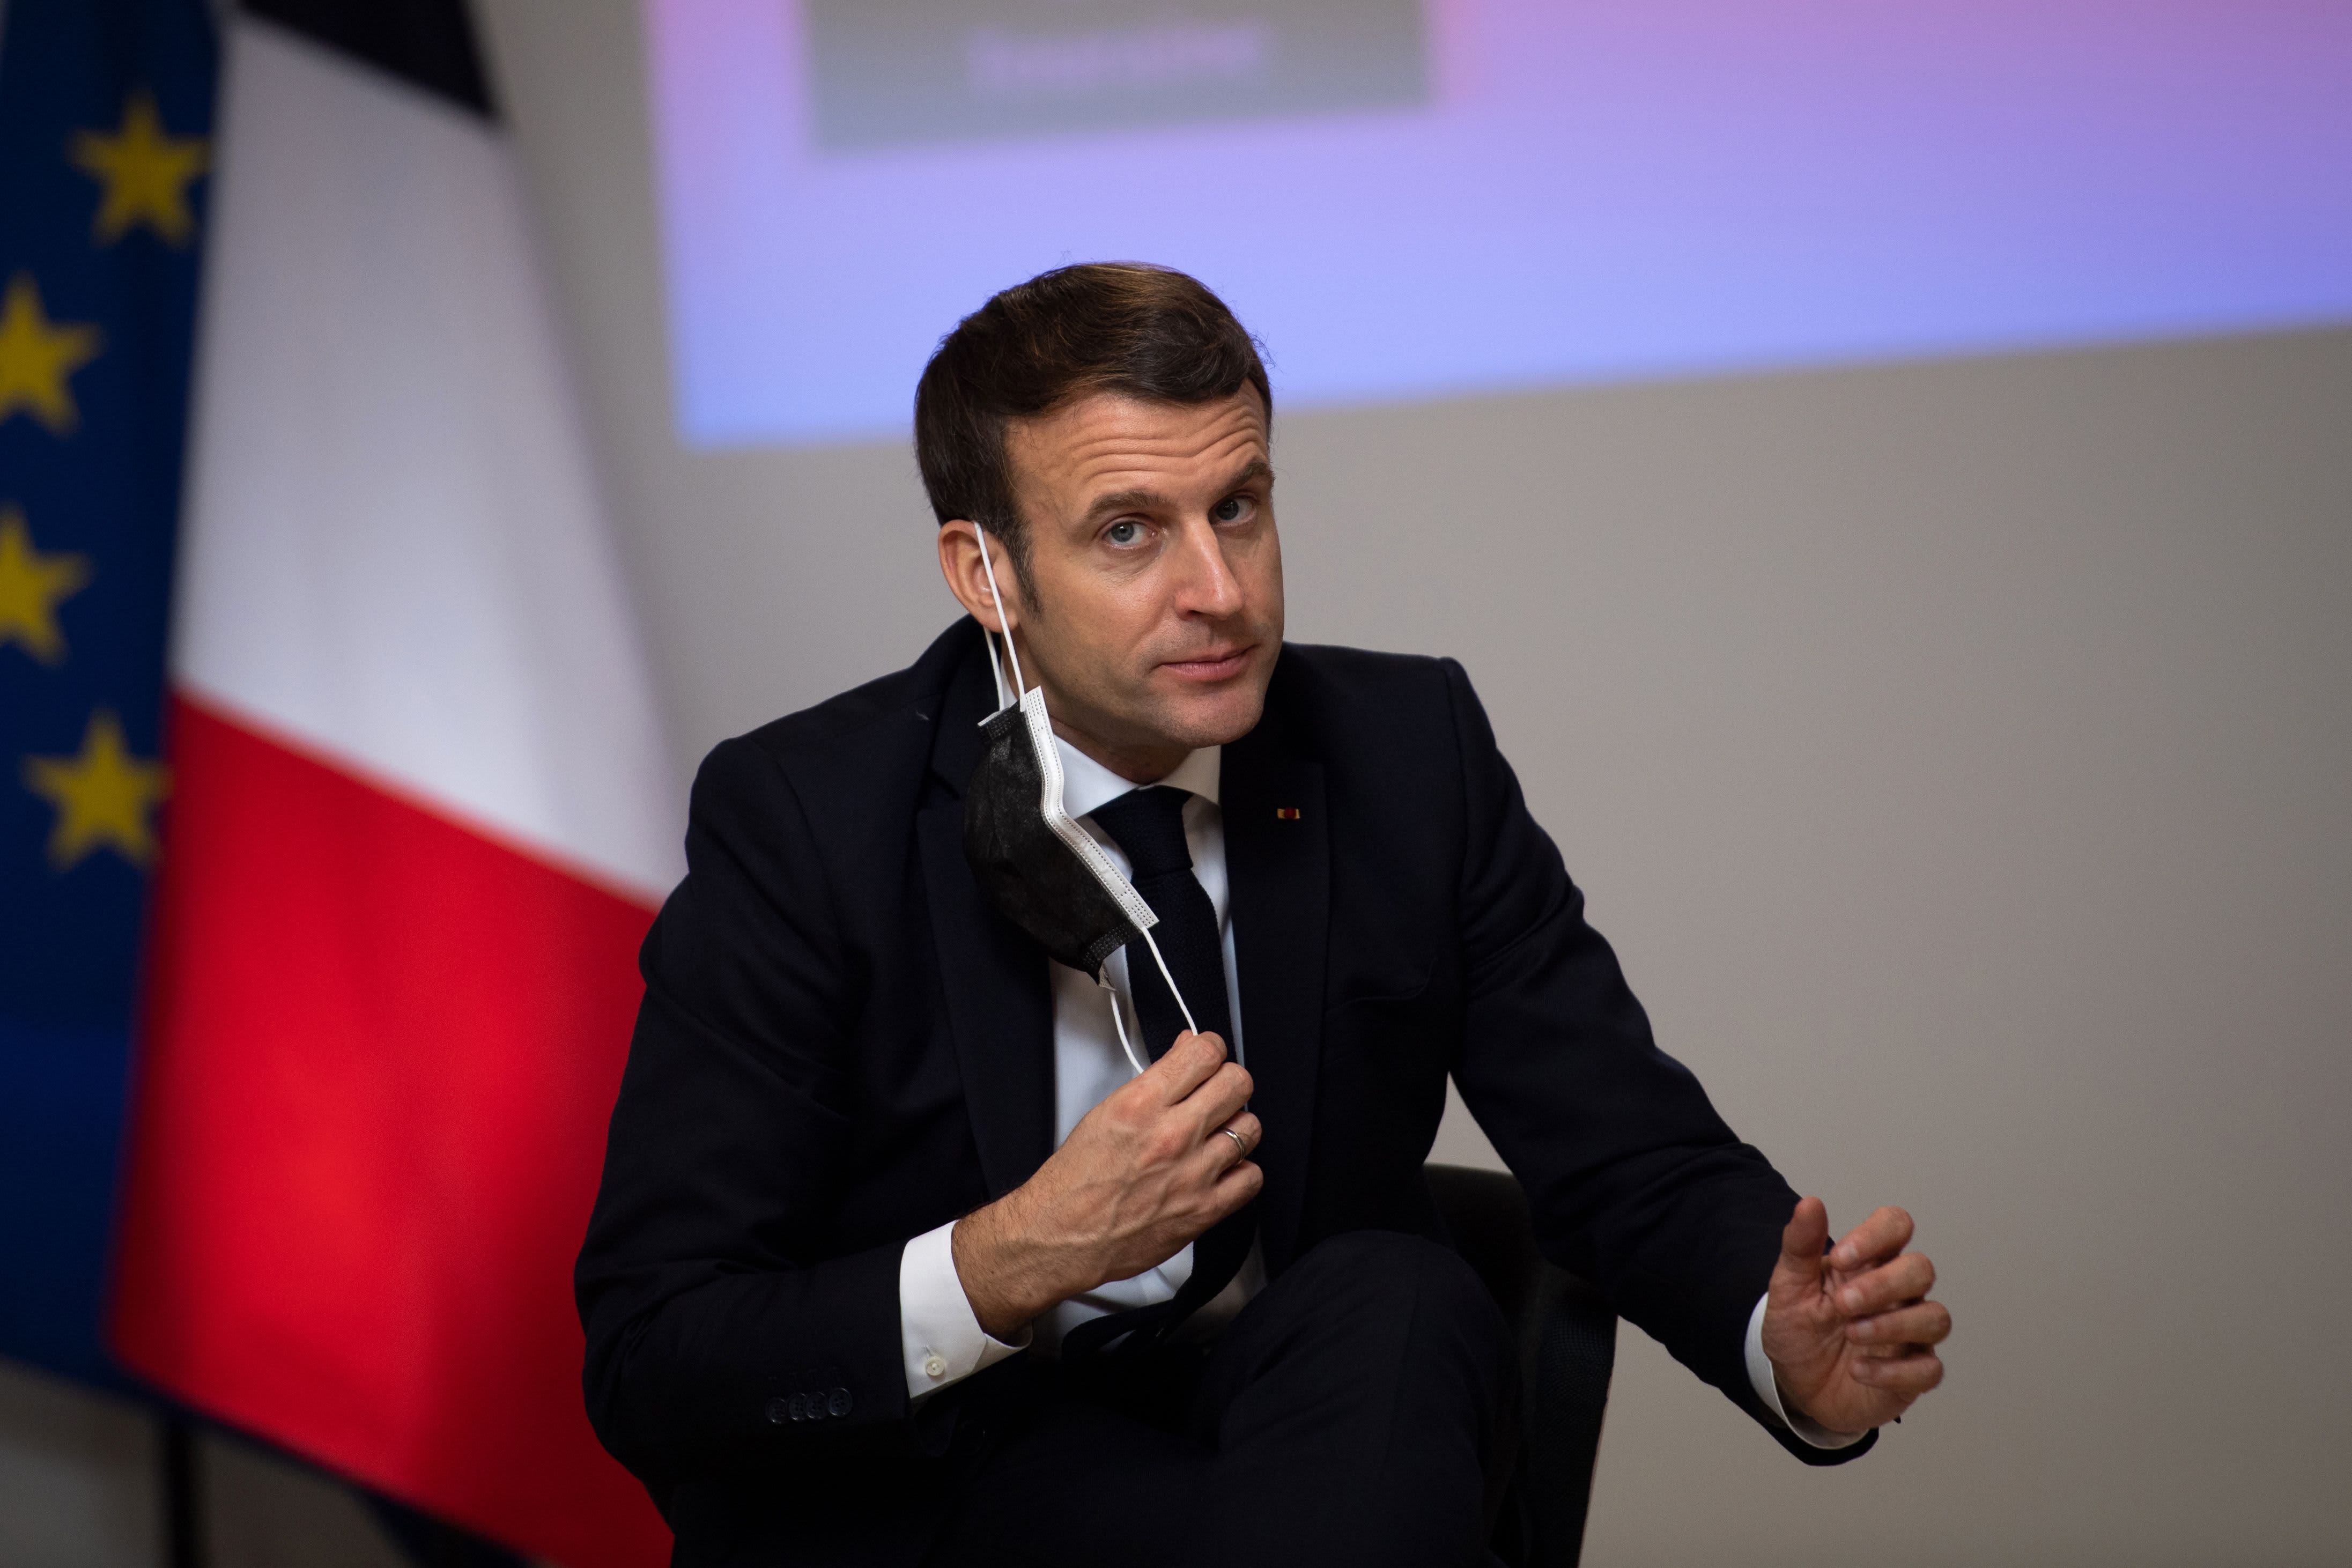 Rolling out could stave off Macron’s re-election chances